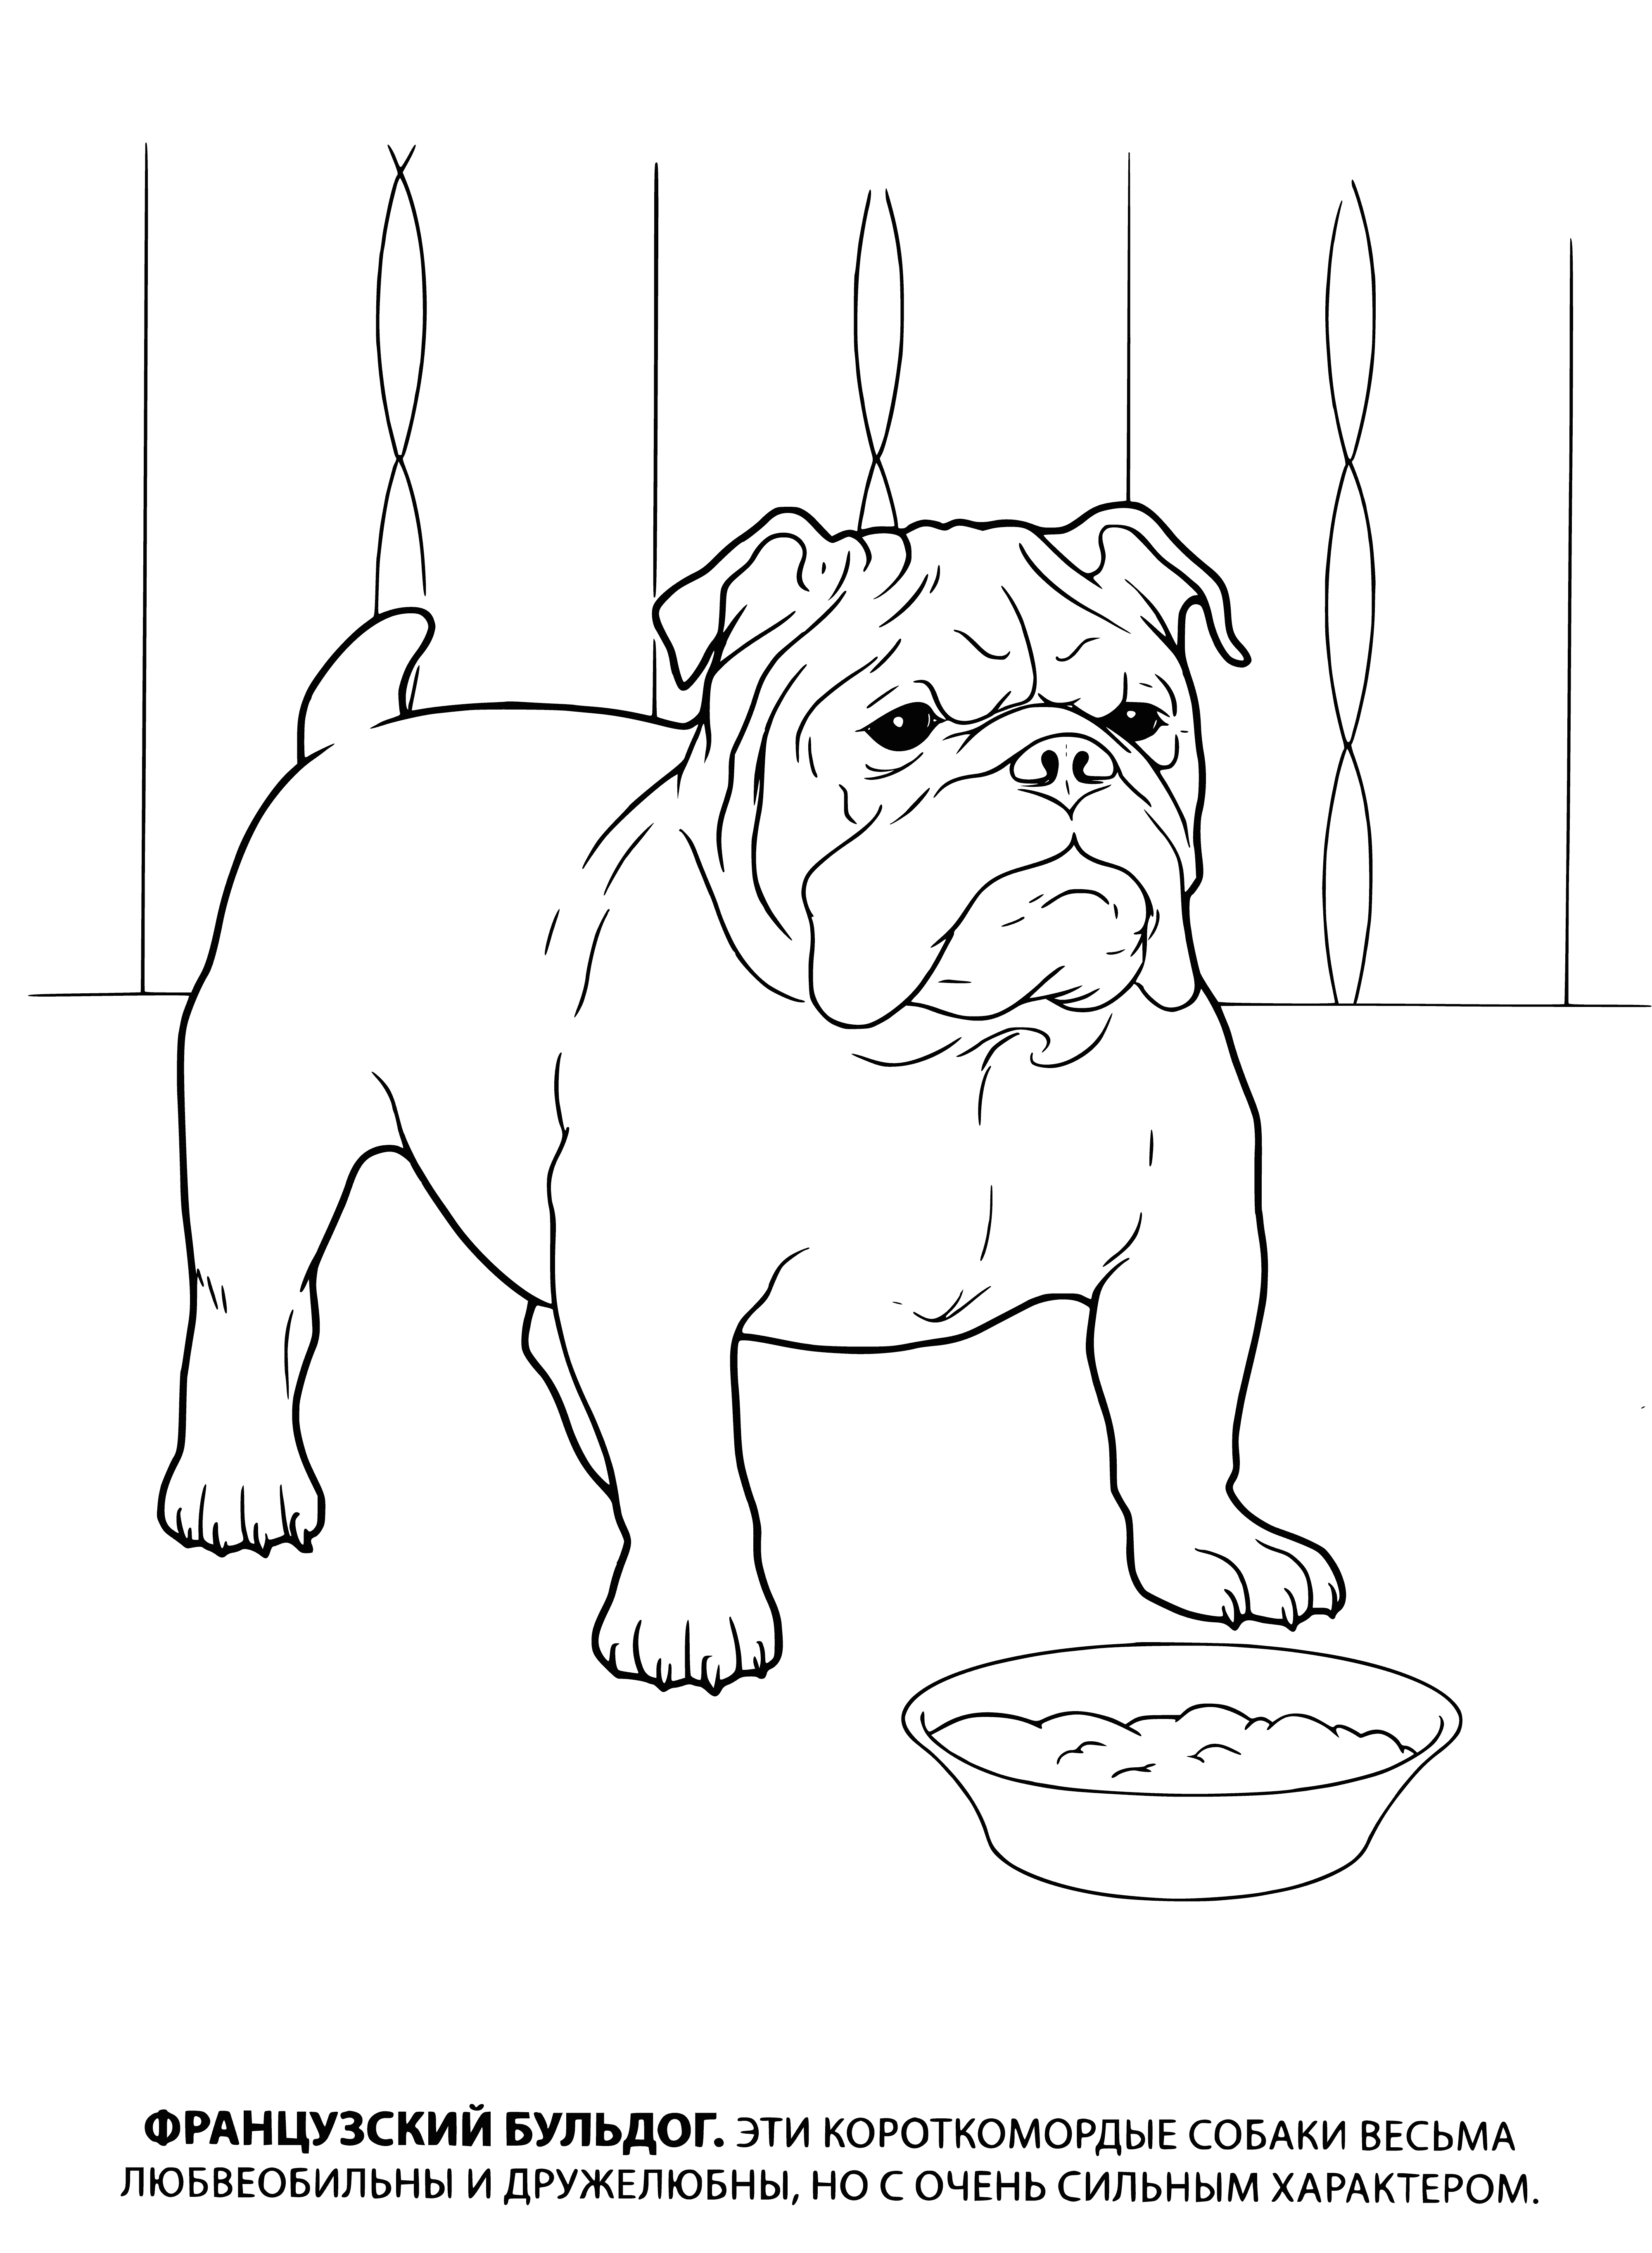 coloring page: Small, muscular French Bulldogs have short legs, wrinkle snouts, big round eyes & short, smooth coats. They're gentle & affectionate, making great companions.